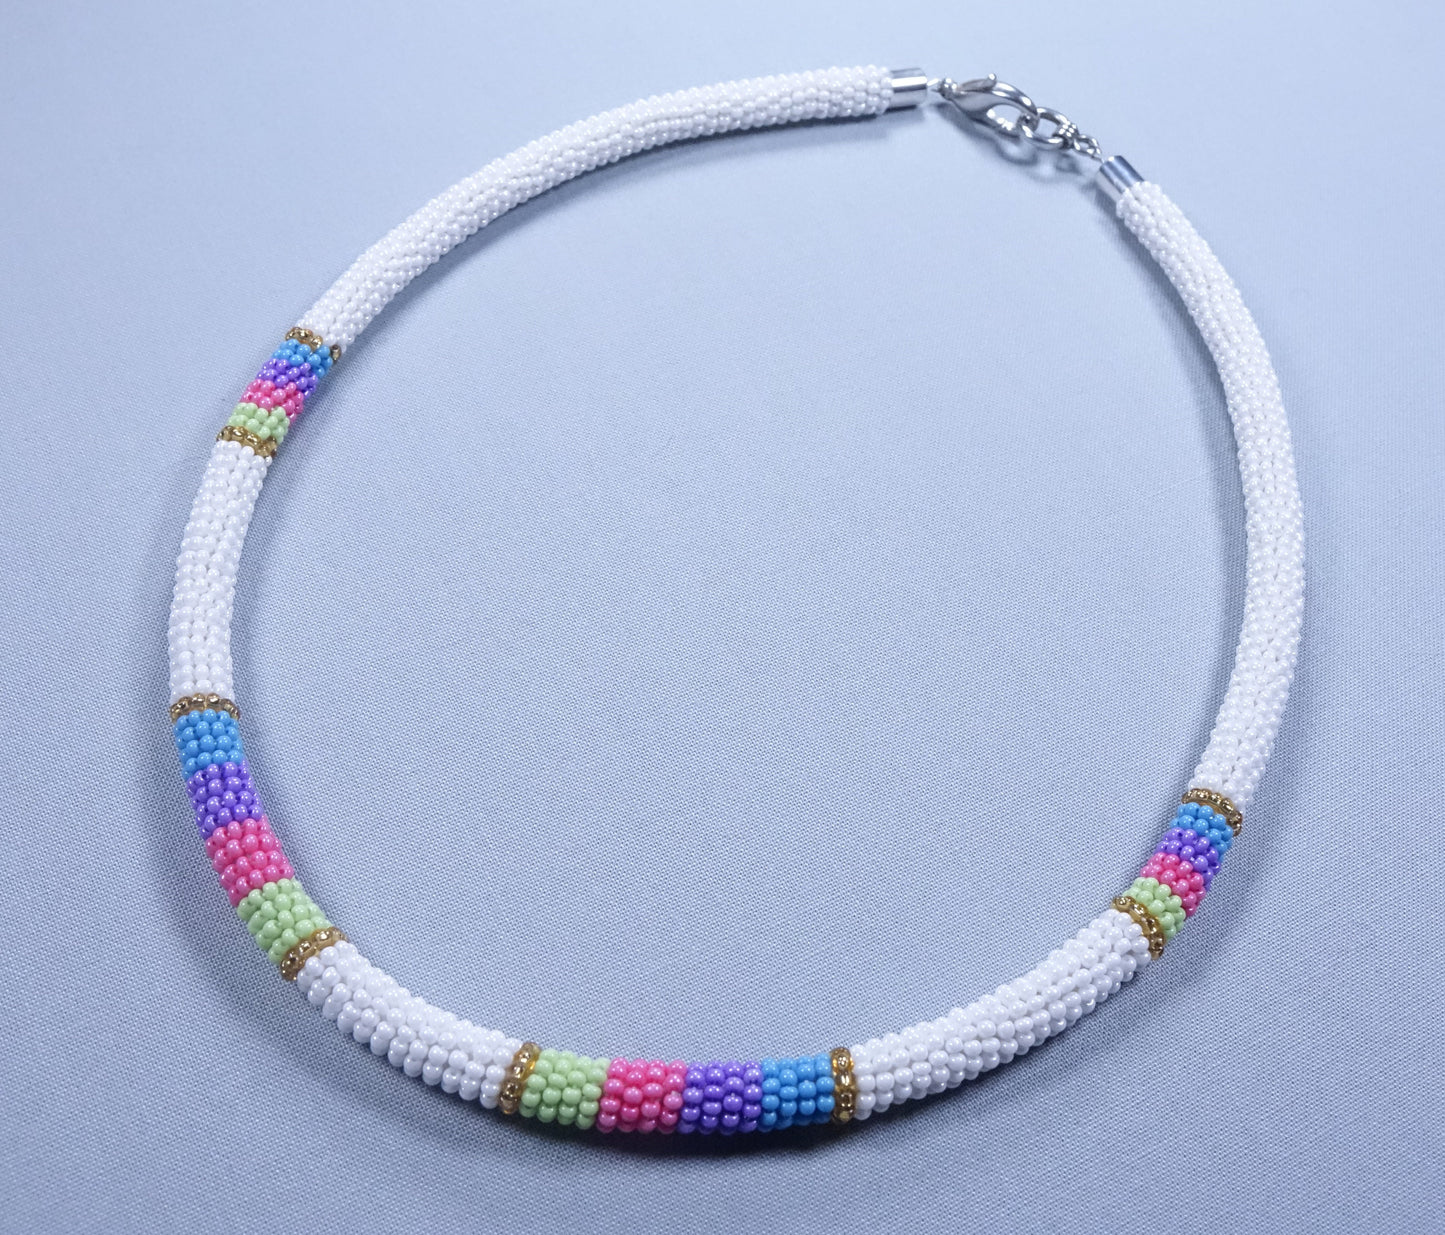 Beaded Choker Necklace 19 inch